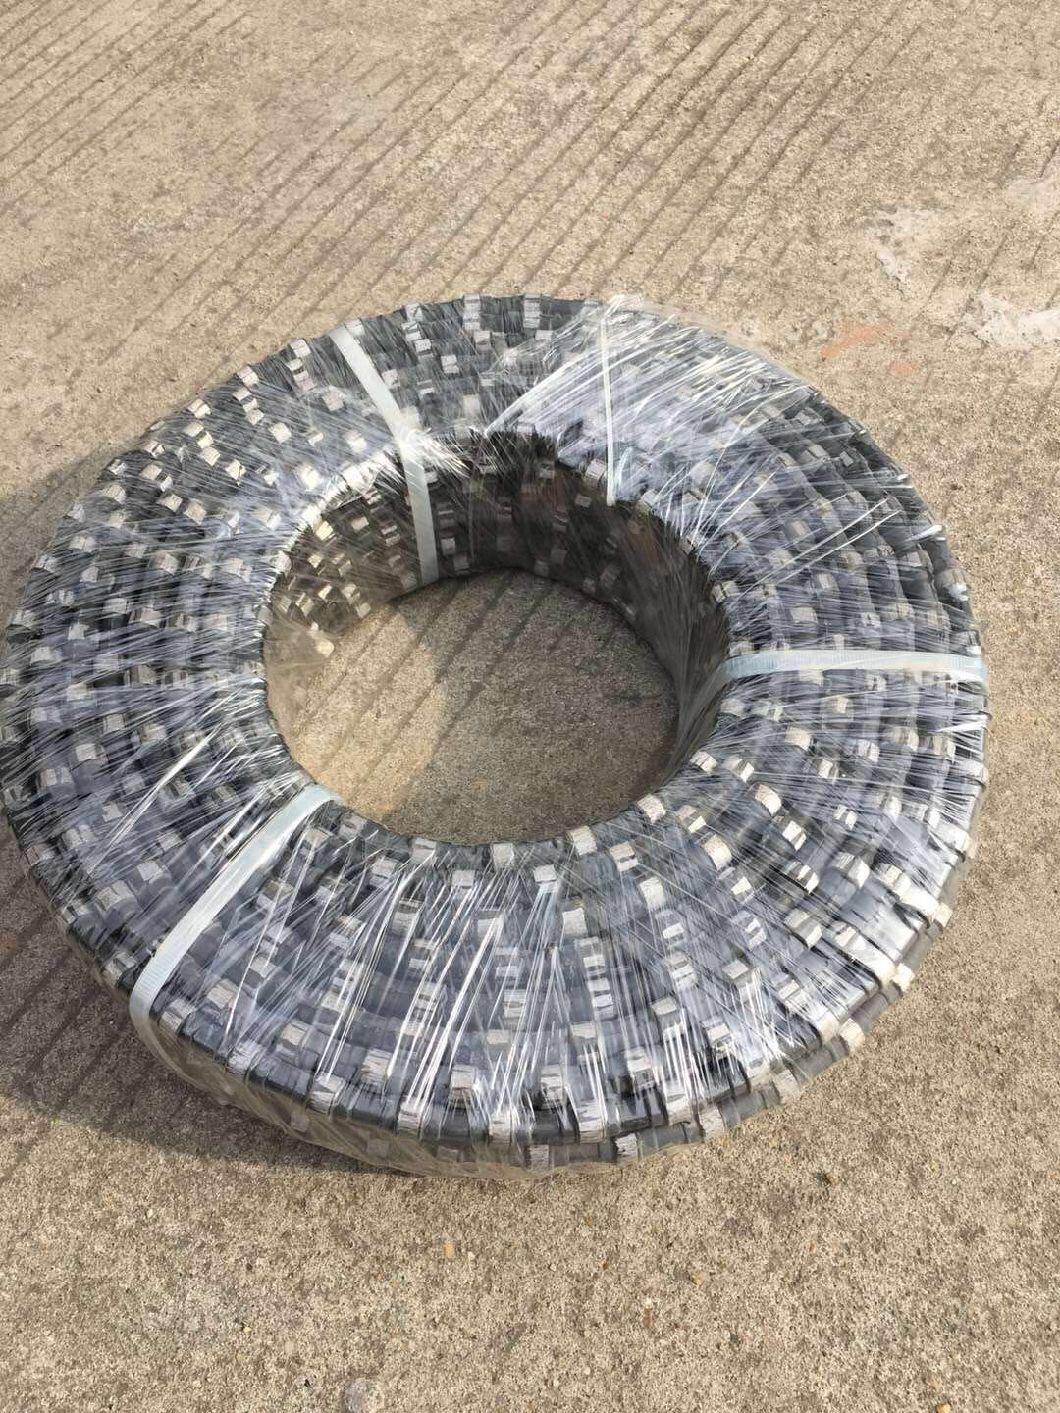 11.5mm Rubber Spring Diamond Wire Saw Cutting Reinforced Concrete Granite Marble Wire Rope